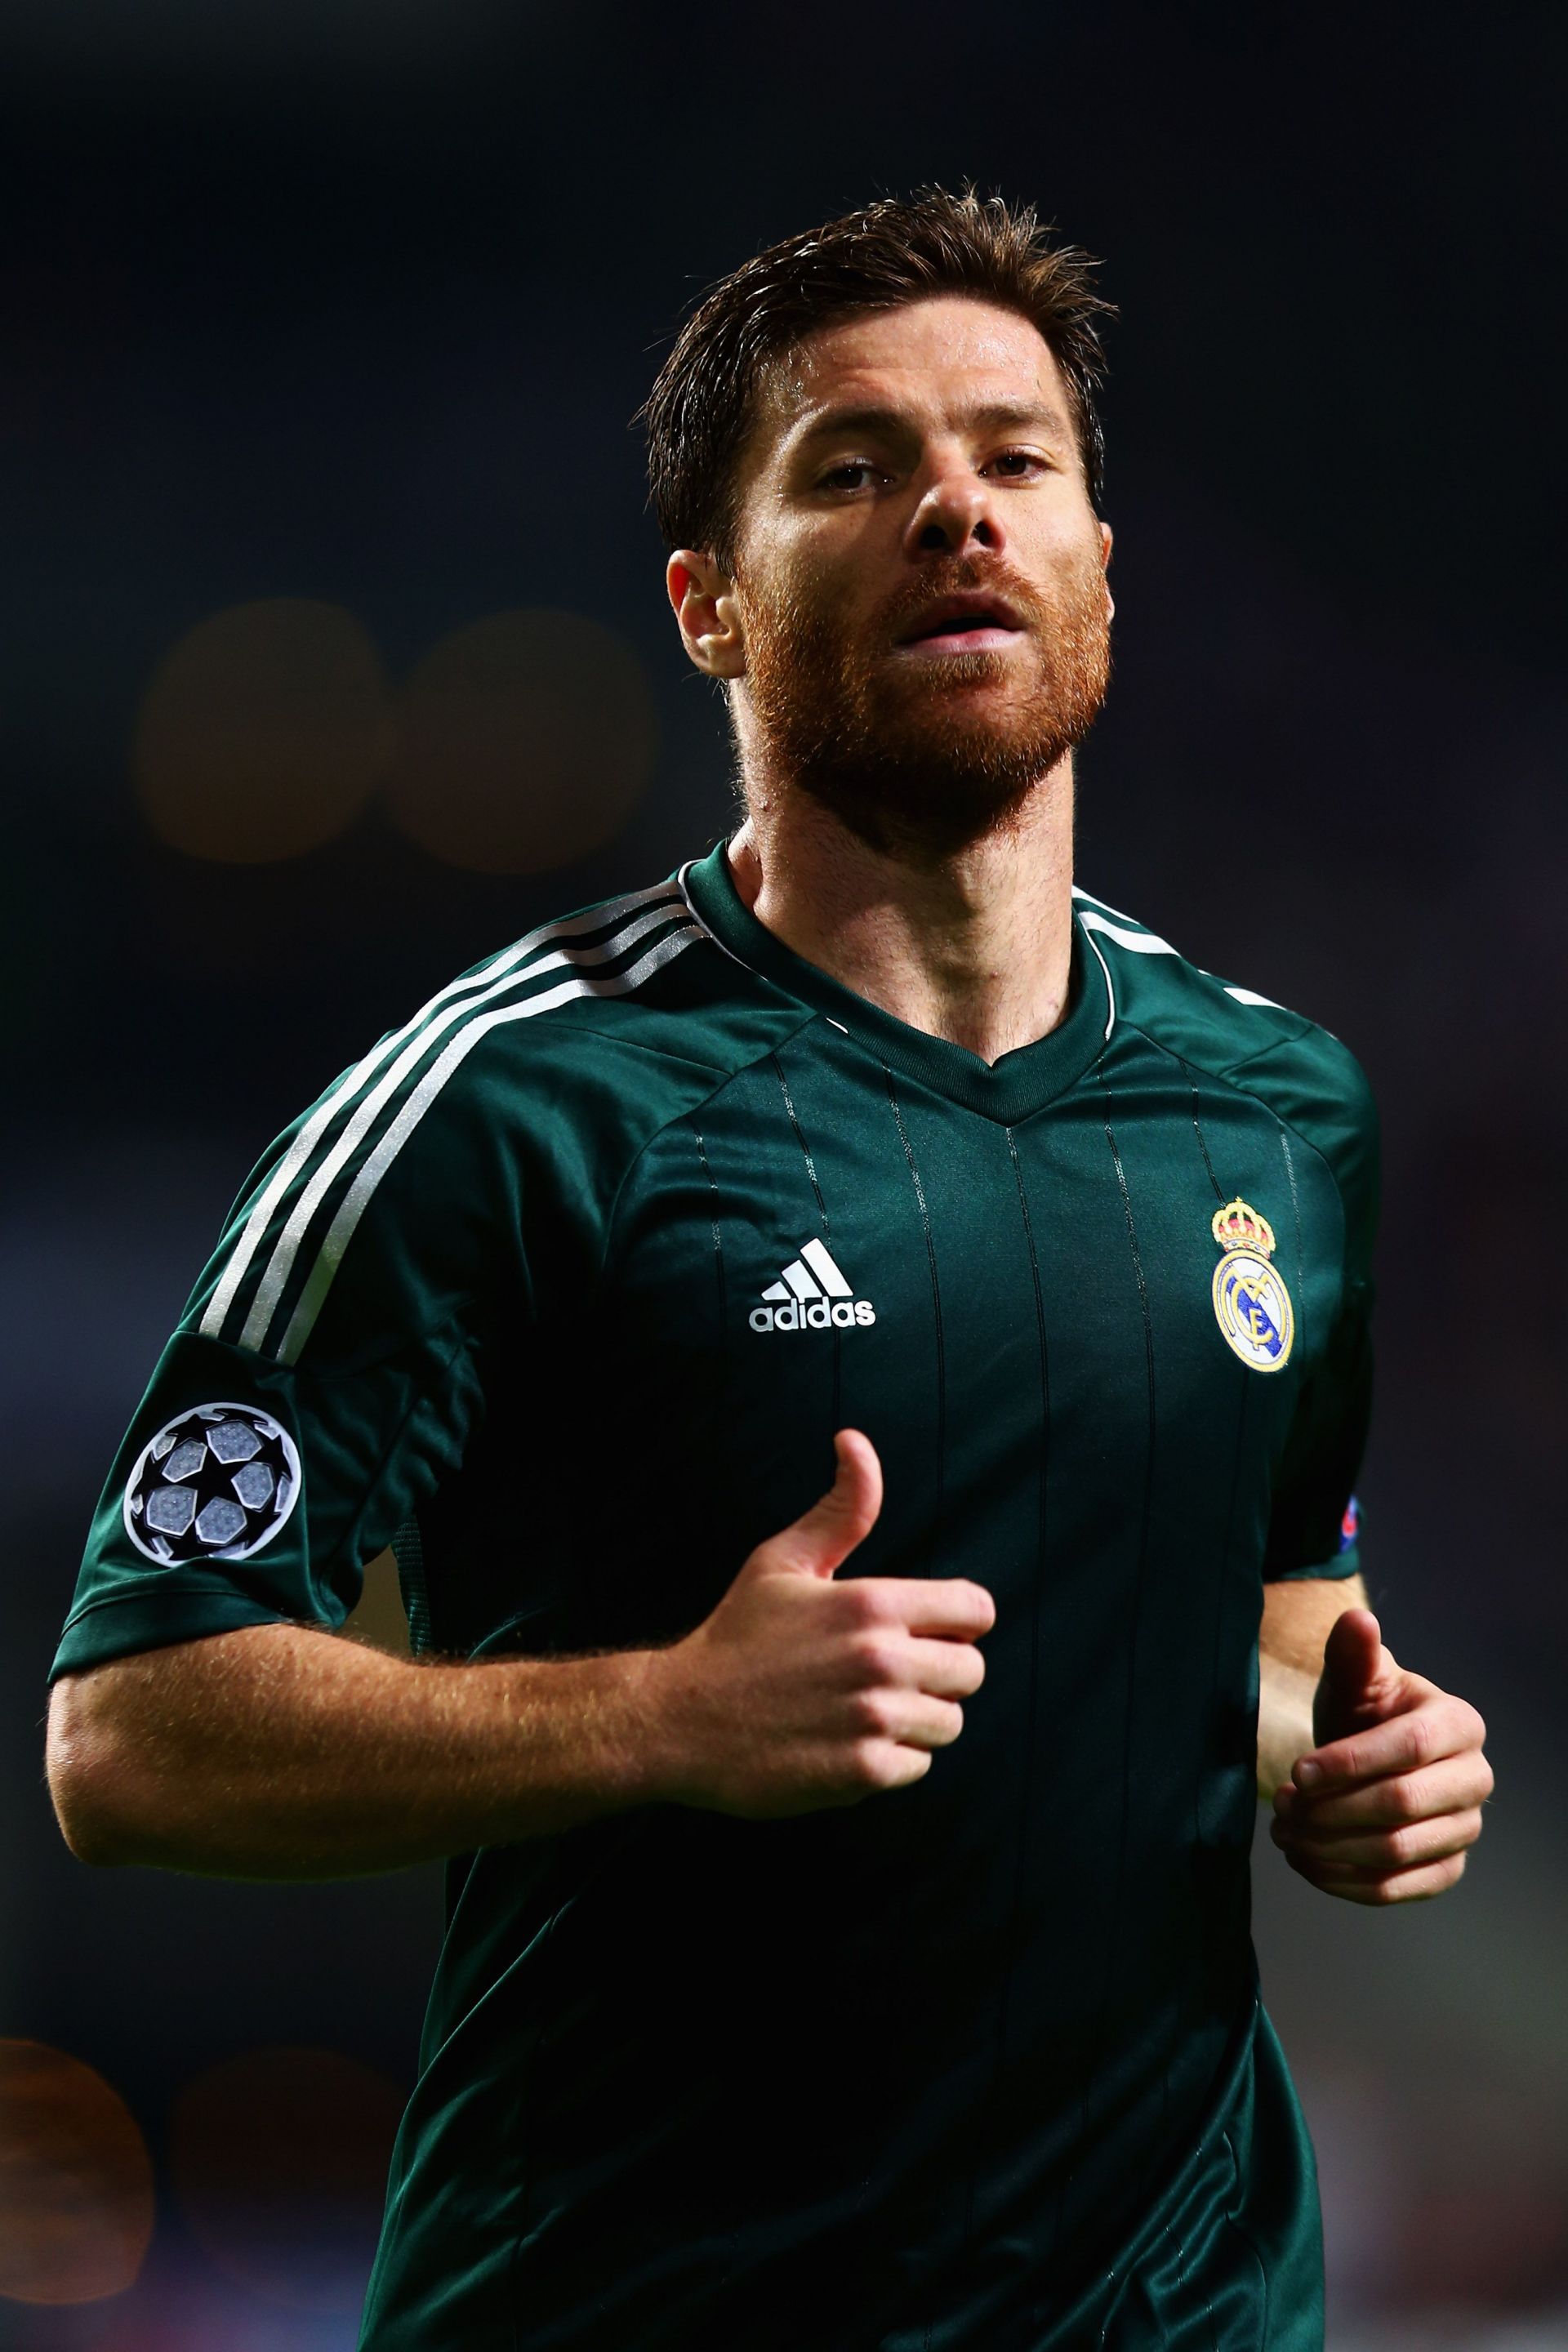 Alonso was a joy to watch at Real Madrid